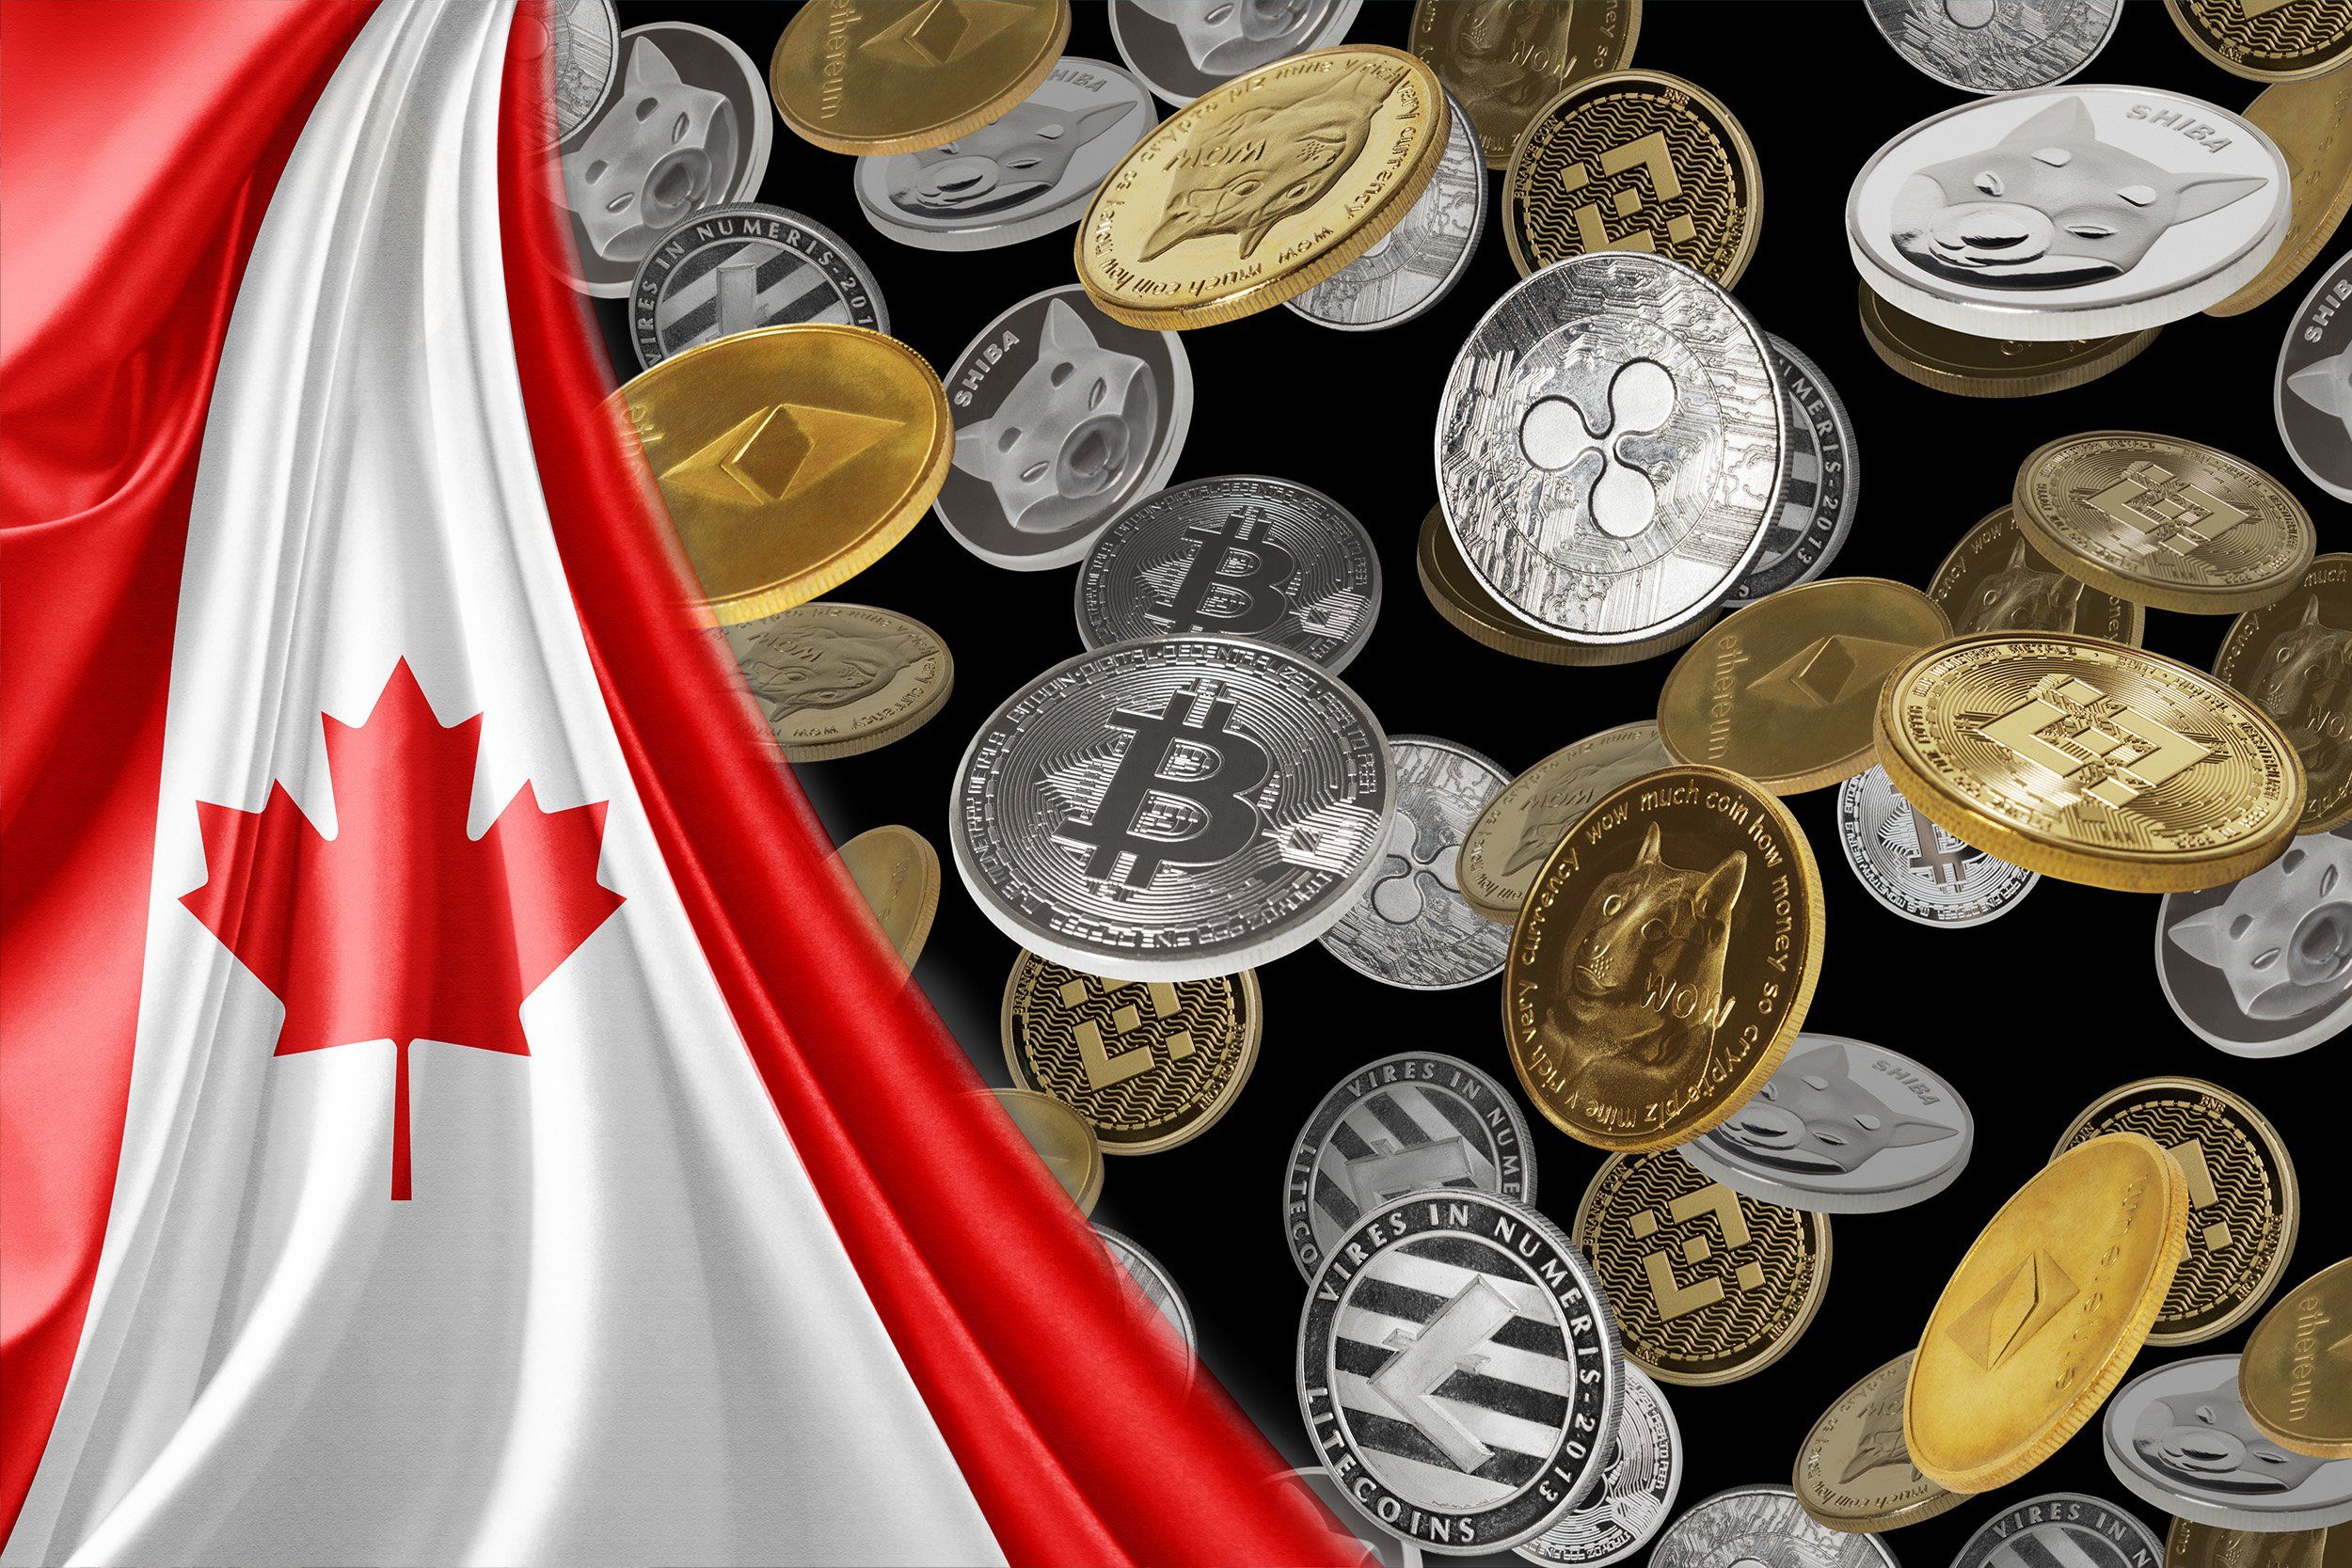 bitcoin canada: How to Buy Bitcoin in Canada - Beginner’s Guide - The Economic Times